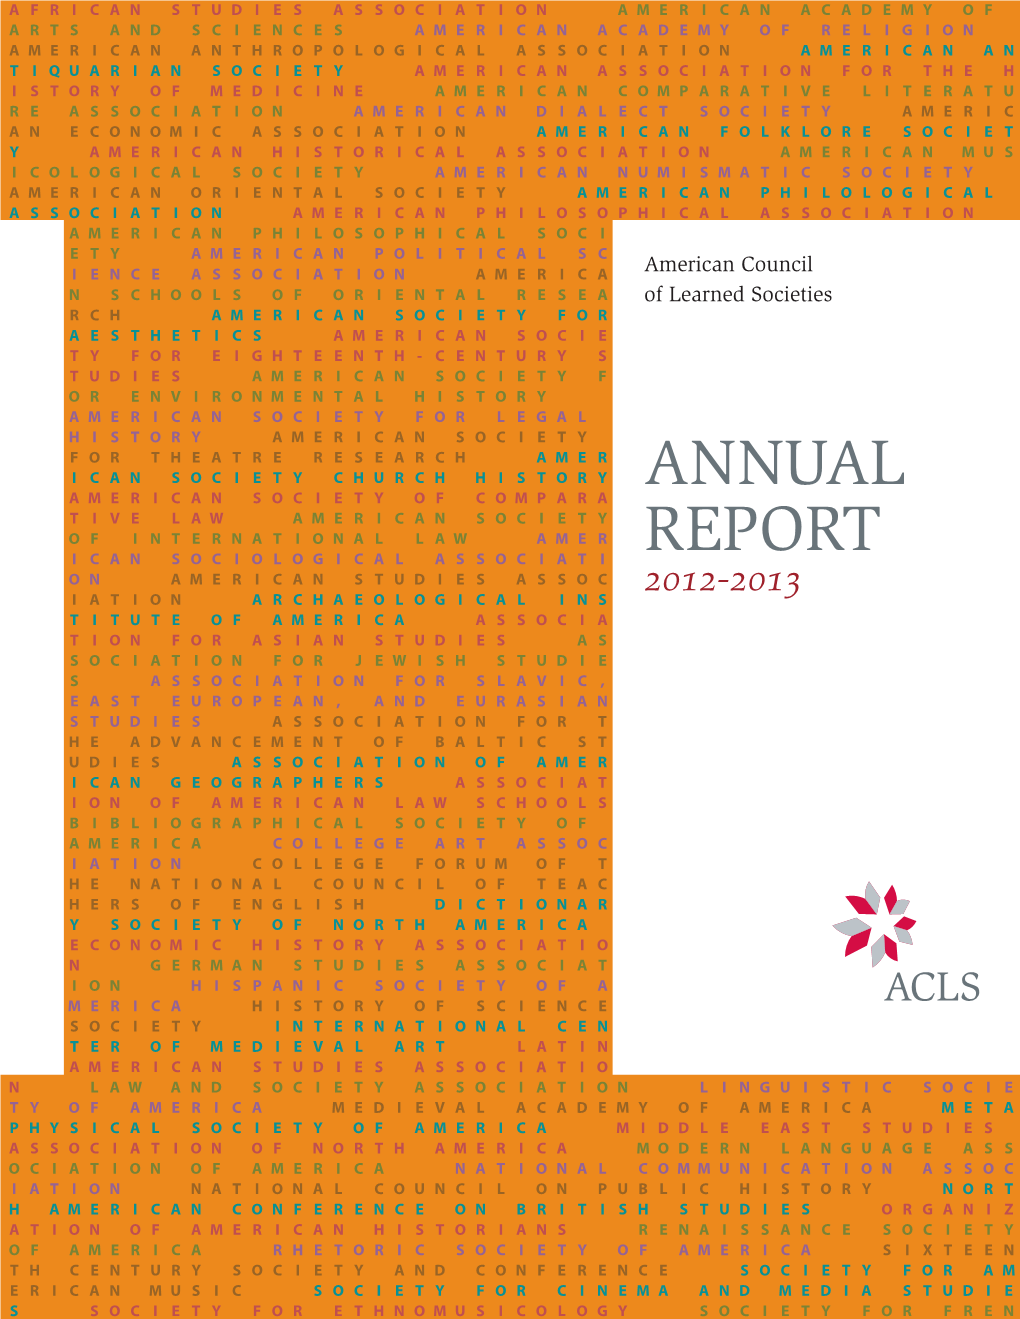 American Council of Learned Societies Annual Report, 2012-2013